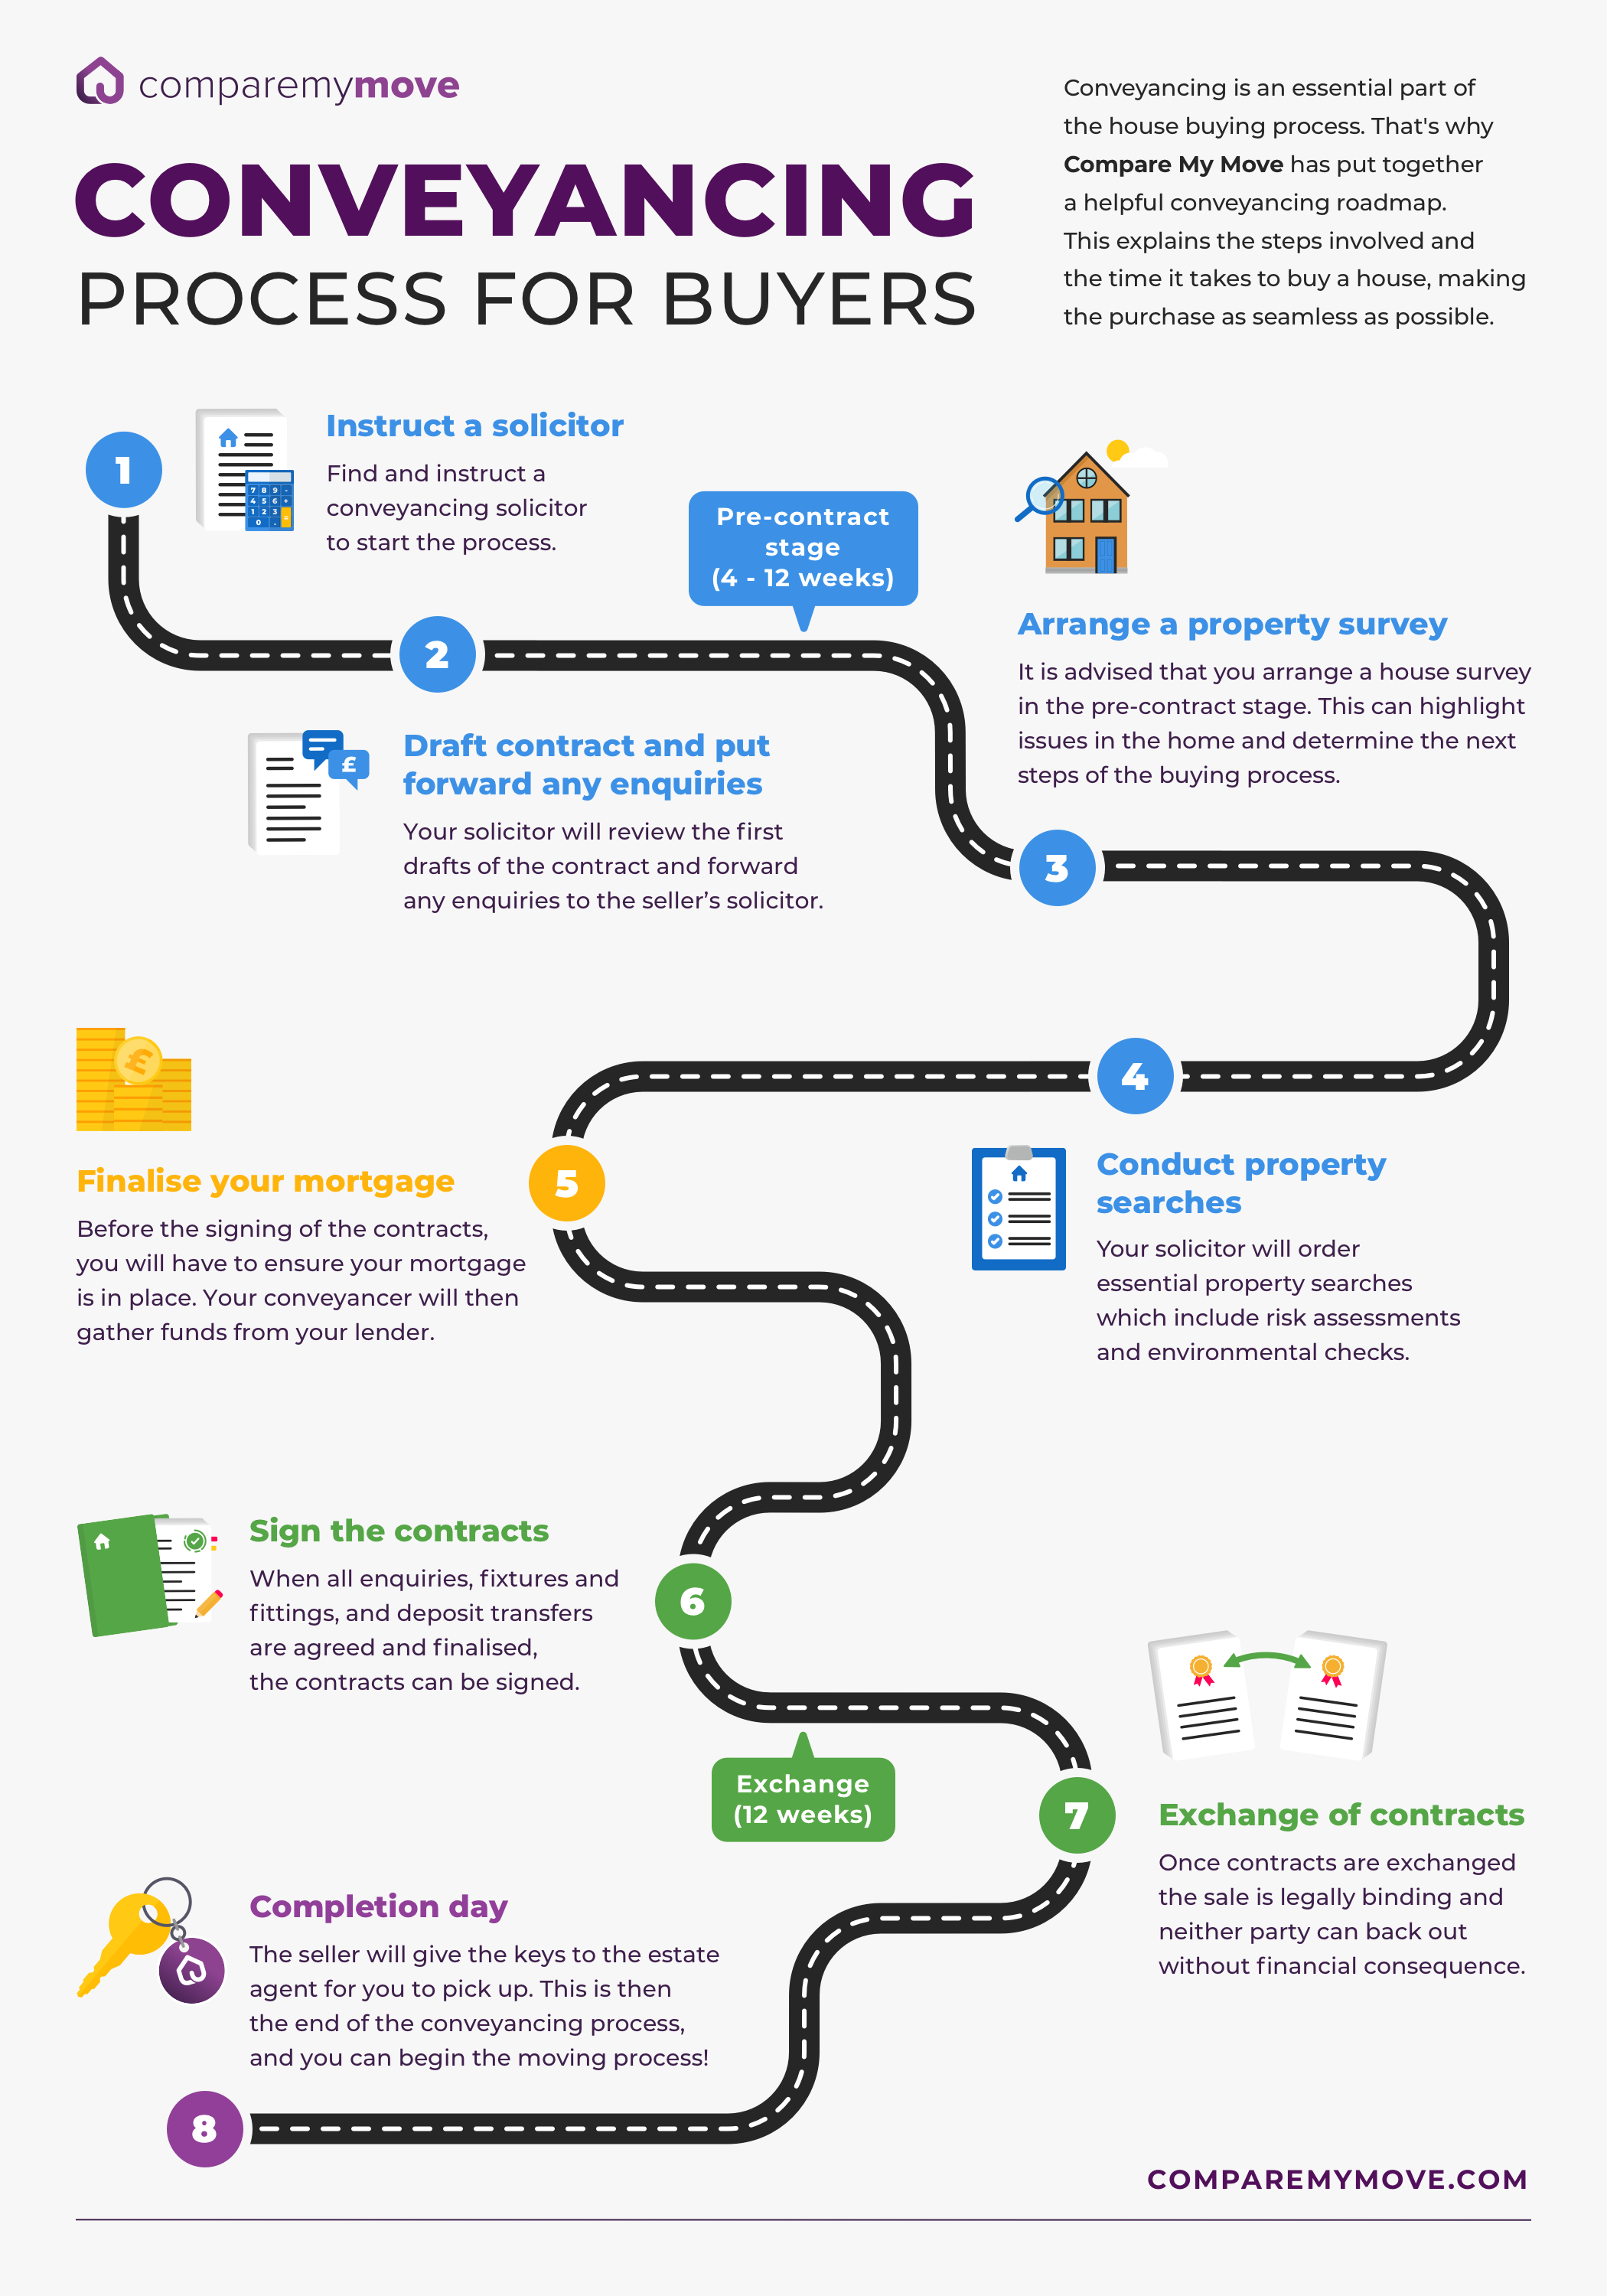 Conveyancing Process for Buyers